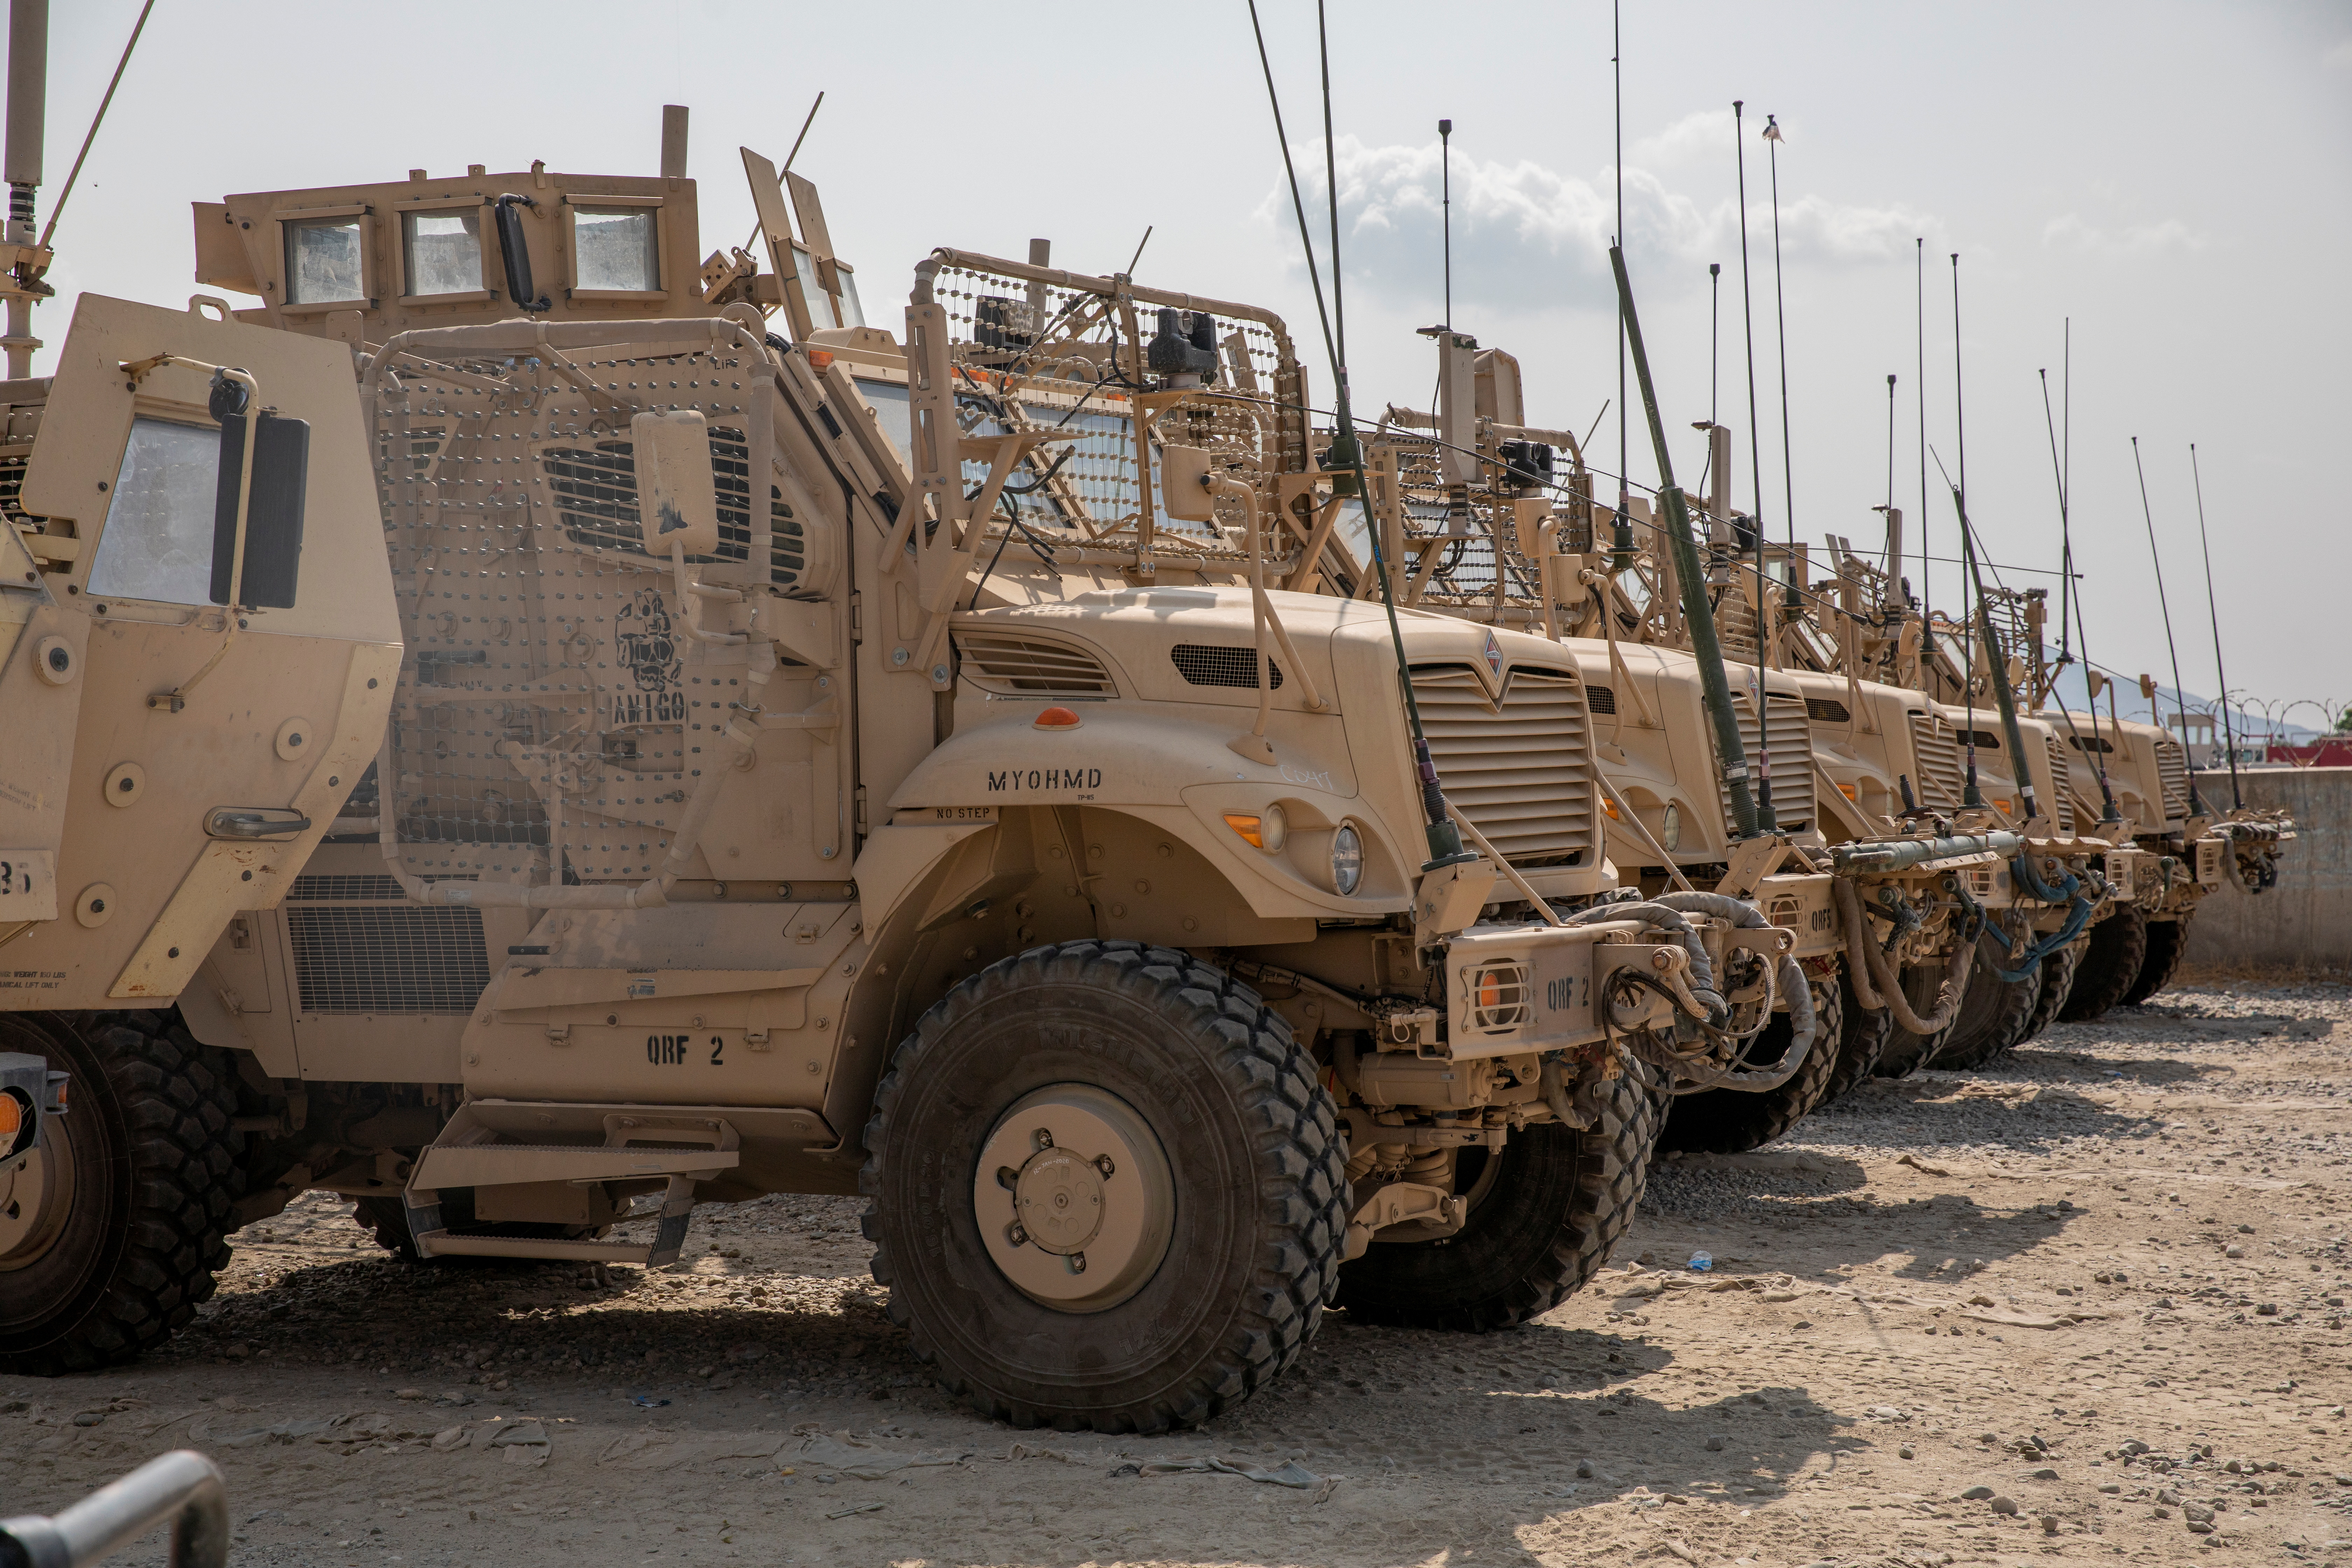 U.S. Army soldiers from the 10th Mountain Division and U.S. contractors prepare Mine Resistant Ambush Protected vehicles, MRAPs, to be transported off of base in support of the withdrawal mission in Kandahar, Afghanistan, August 21, 2020. Picture taken August 21, 2020. U.S. Army/Sgt. Jeffery J. Harris/Handout via REUTERS THIS IMAGE HAS BEEN SUPPLIED BY A THIRD PARTY.